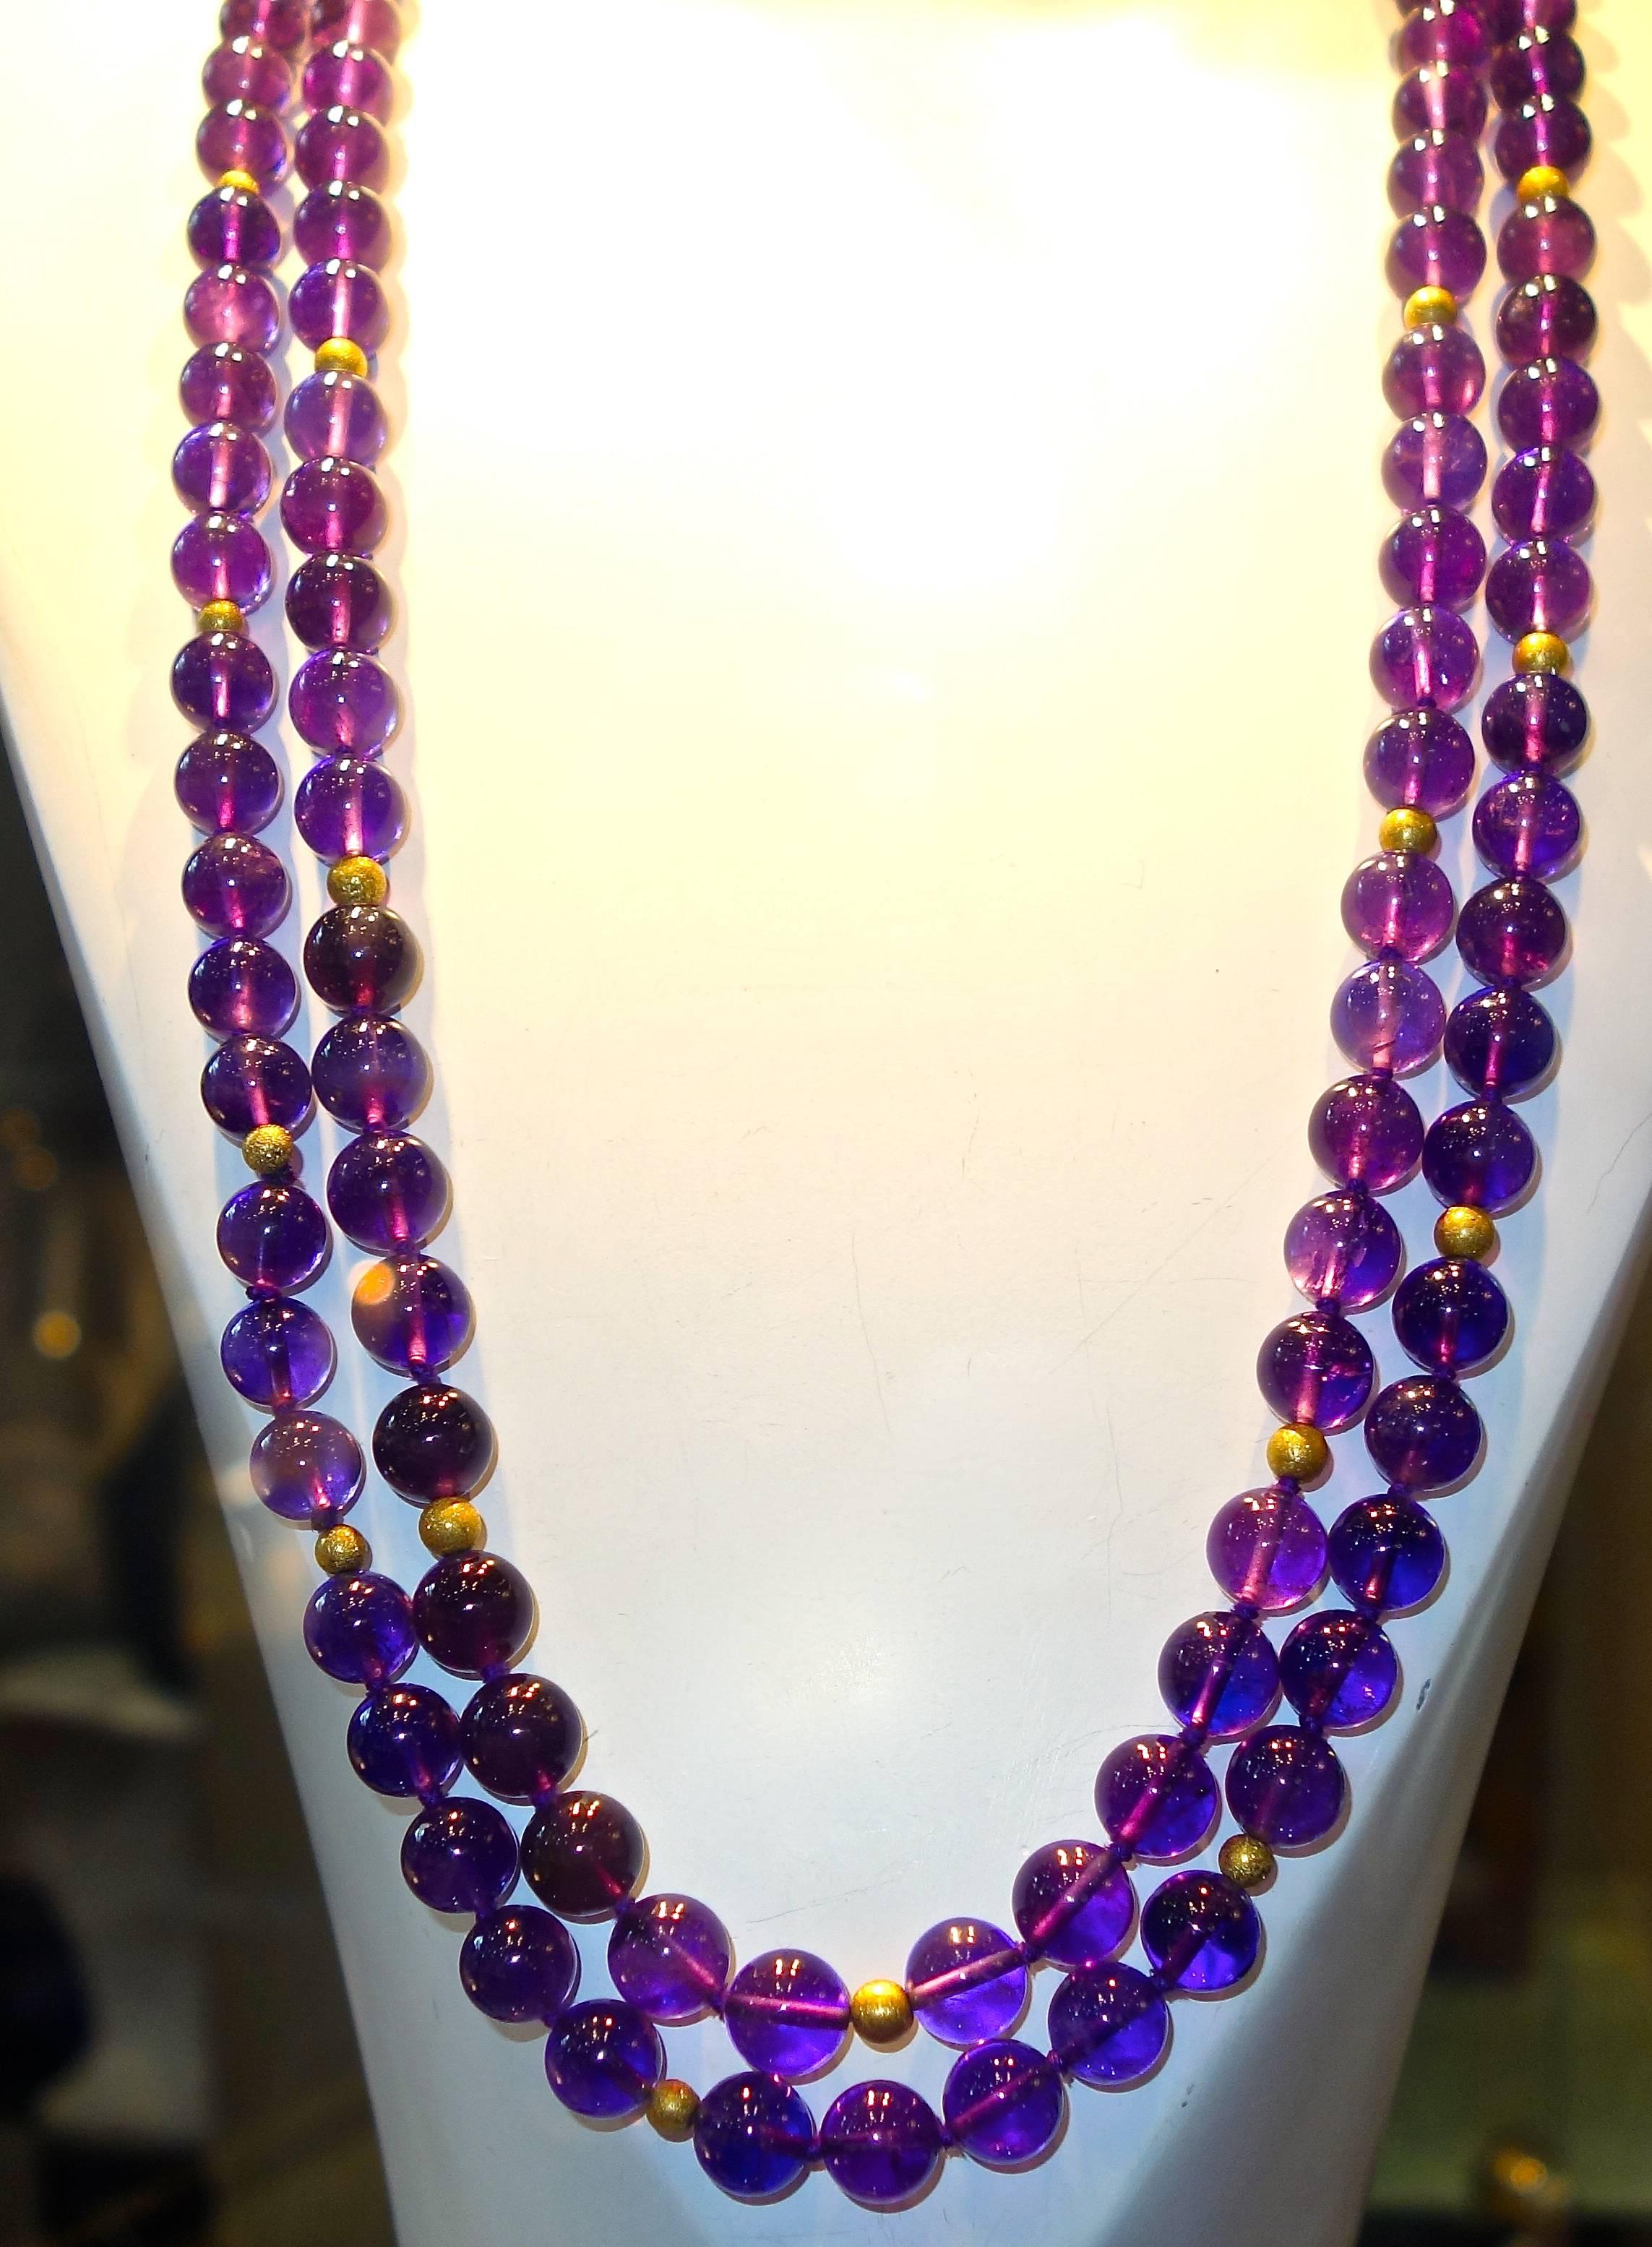 Fine bright purple amethyst beads weighing approximately 875 cts are interspersed with 28 18K gold beads.  This long sautoir is 63 inches in length and the beads range from 9.5 to 10 mm.  All of the amethyst are bright and clear.